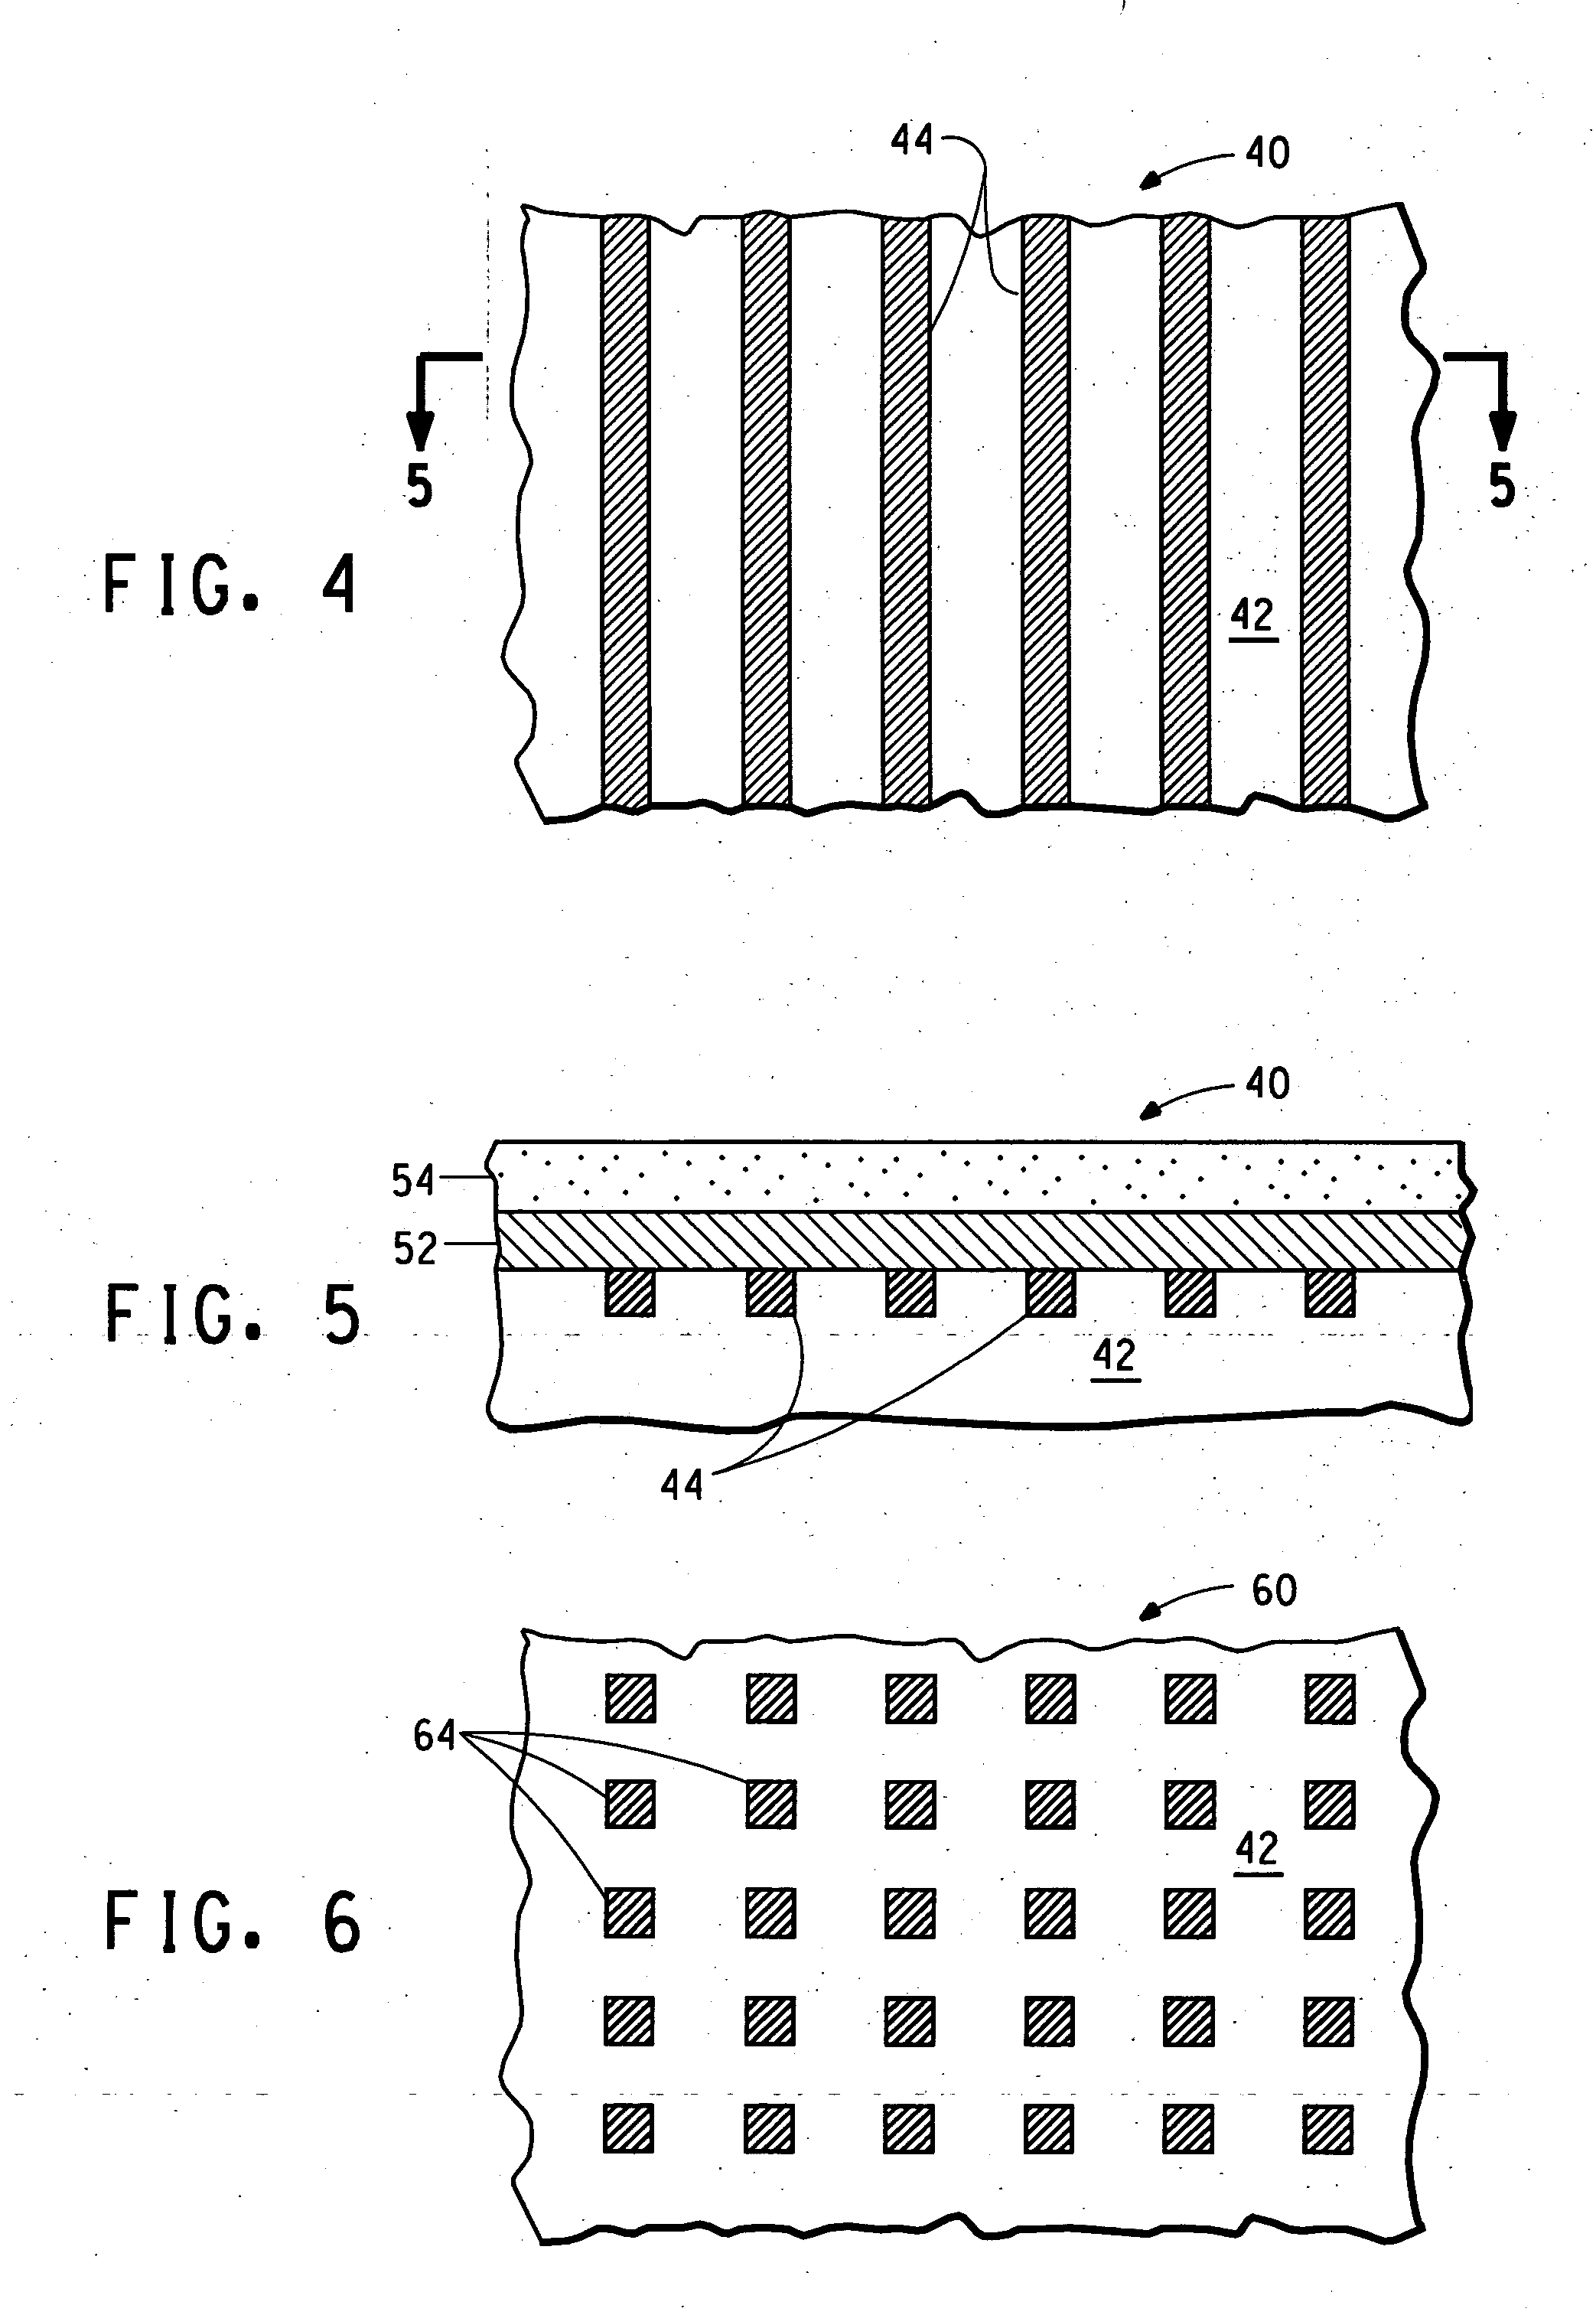 Processes for forming layers for electronic devices using heating elements